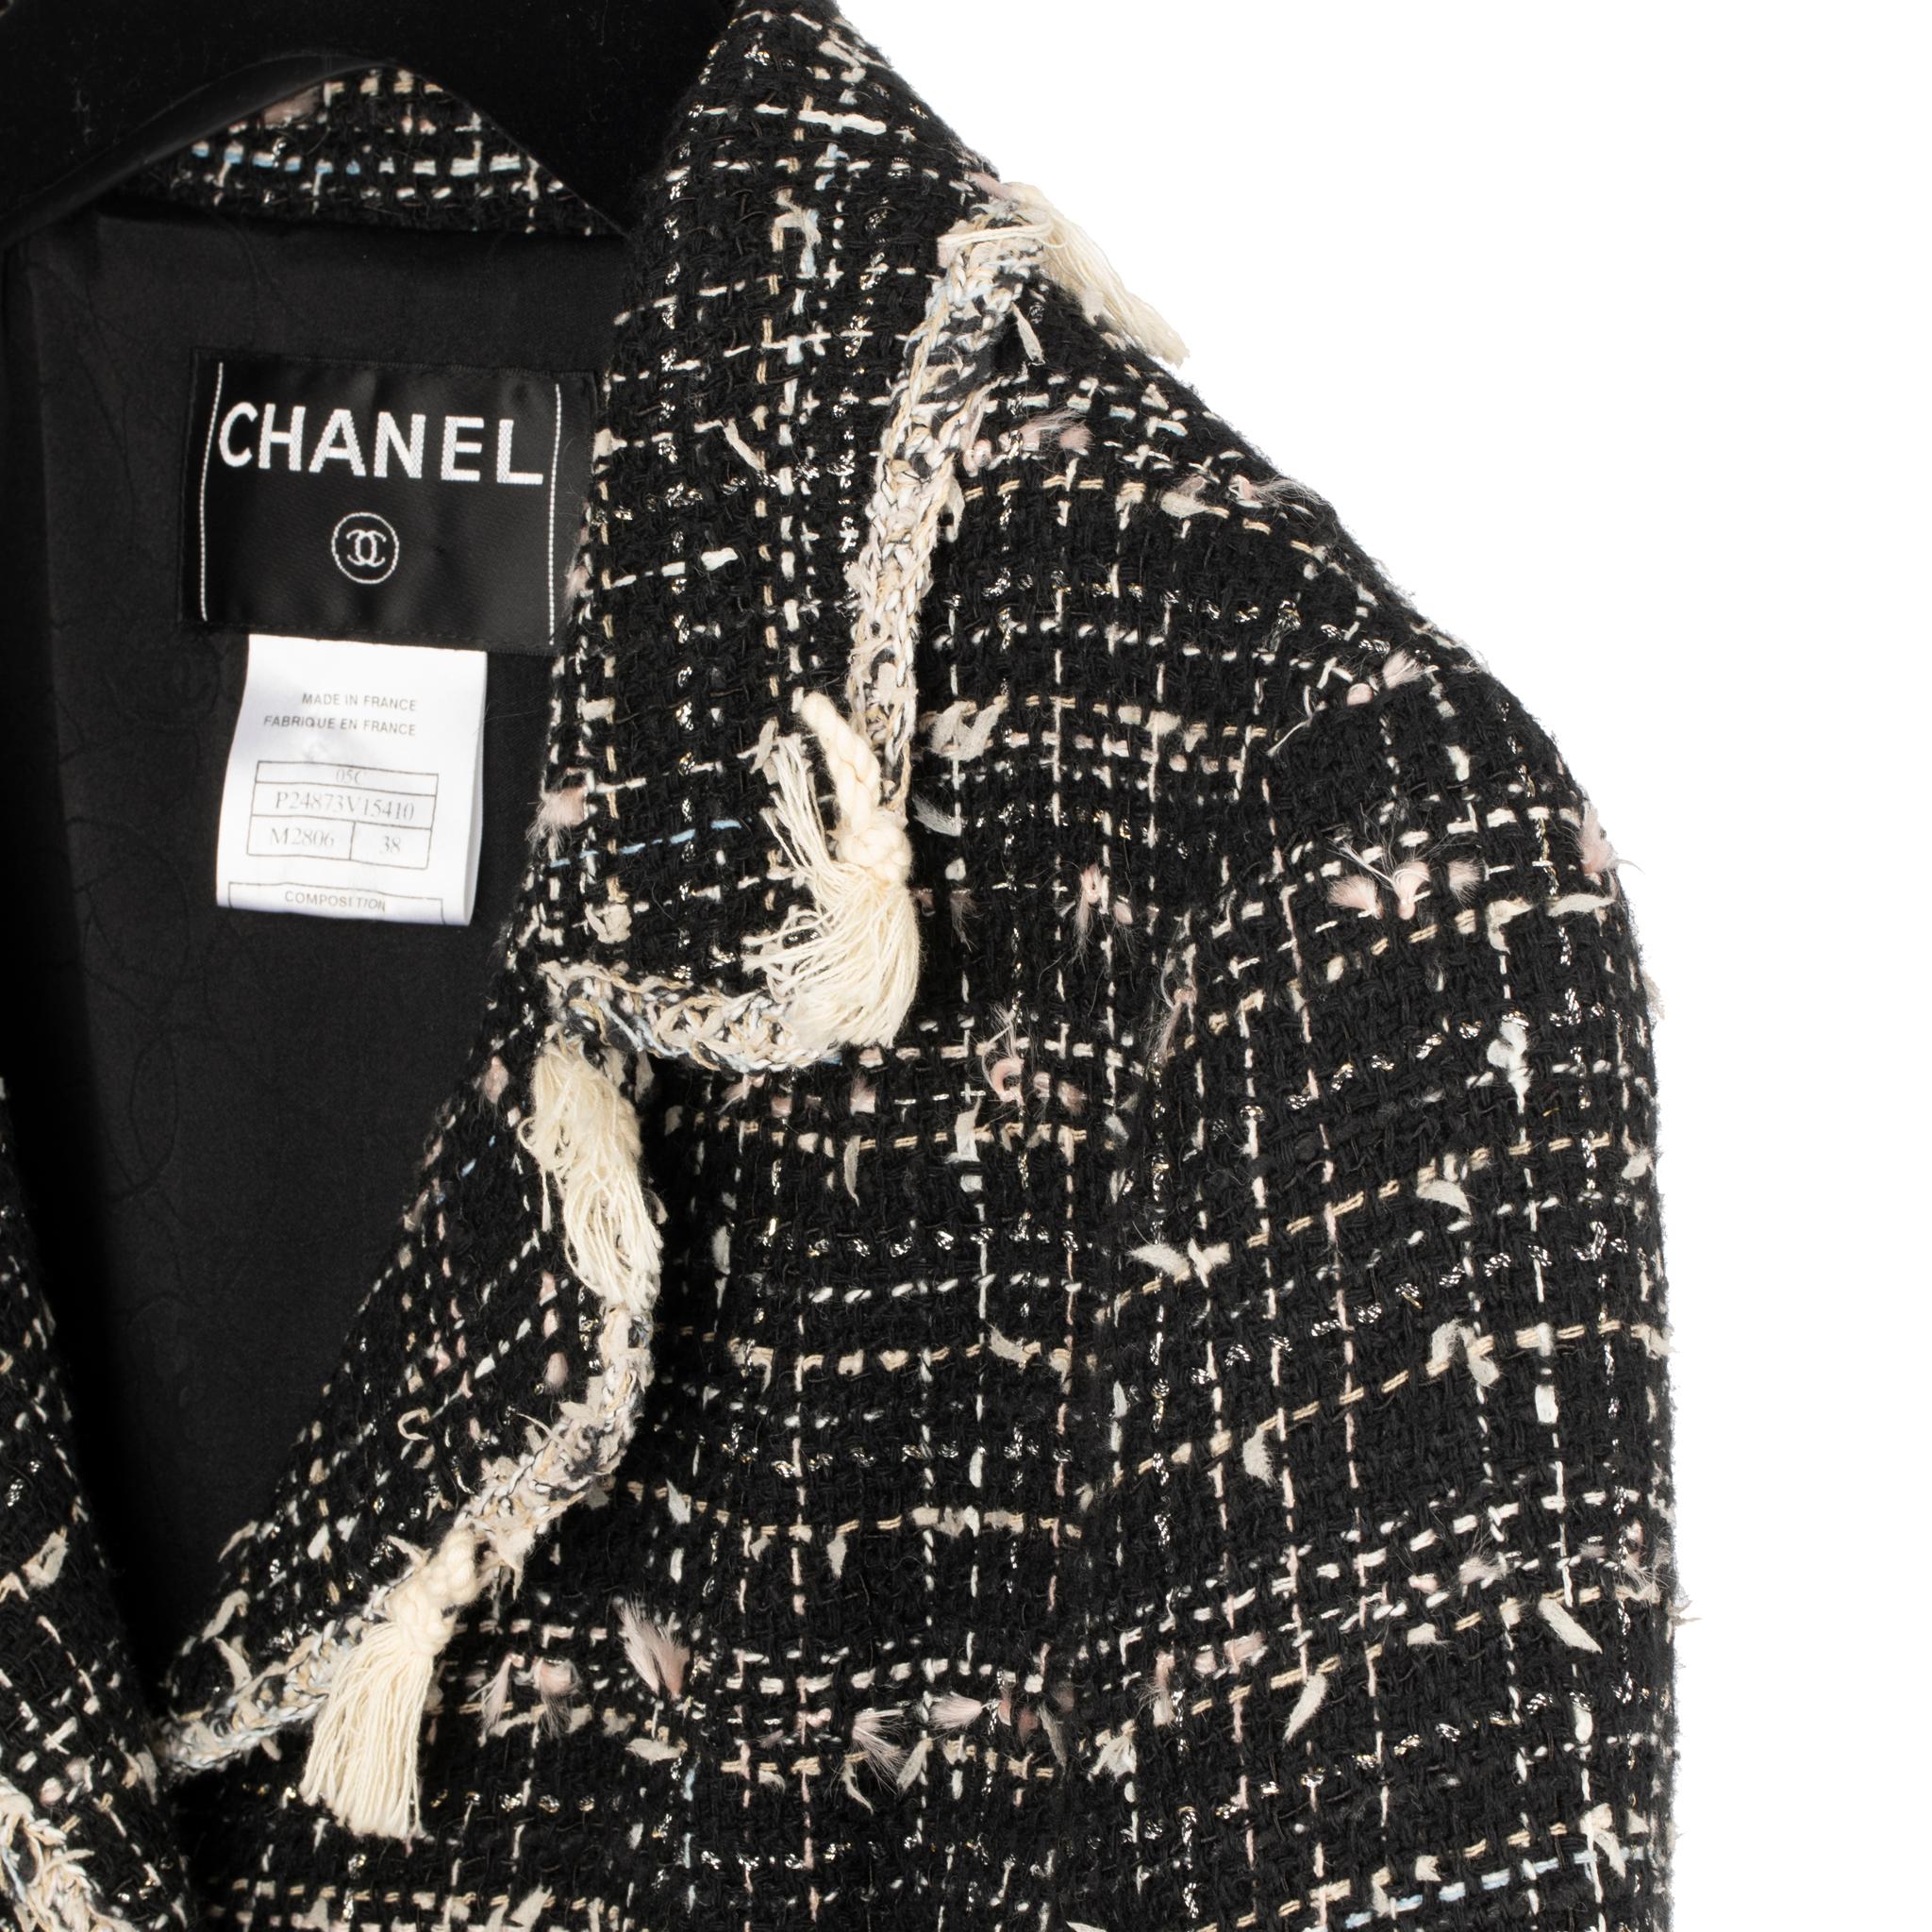 Chanel Black & Ivory Tweed Jacket

Brand:

Chanel

Product:

 Black & Ivory Tweed Jacket 

Size:

38 Fr

Colour:

Black & Ivory

Material:

Tweed: 45% Acrylic, 25% Cotton, 10% Nylon, 4% Mohair, 3% Polyester, 3% Silk

Product Code:

P24873V15410 